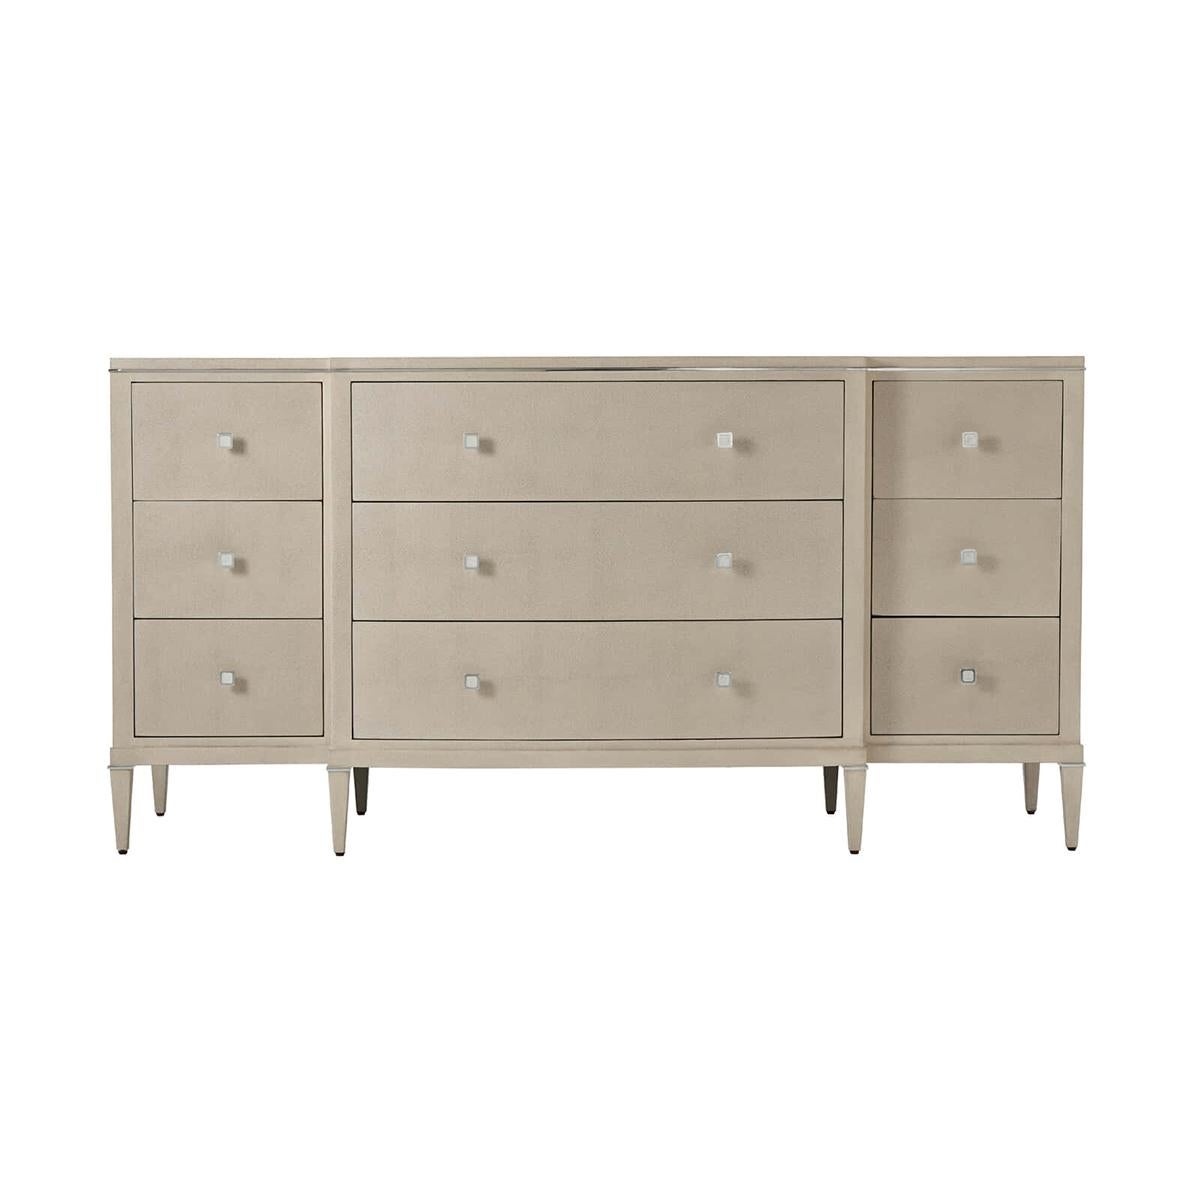 Art Deco Leather dresser wrapped in shagreen embossed leather in our light overcast finish. A nine-drawer dresser with a shaped breakfront having polished nickel hardware and details and raised on square tapered legs.

Dimensions: 71